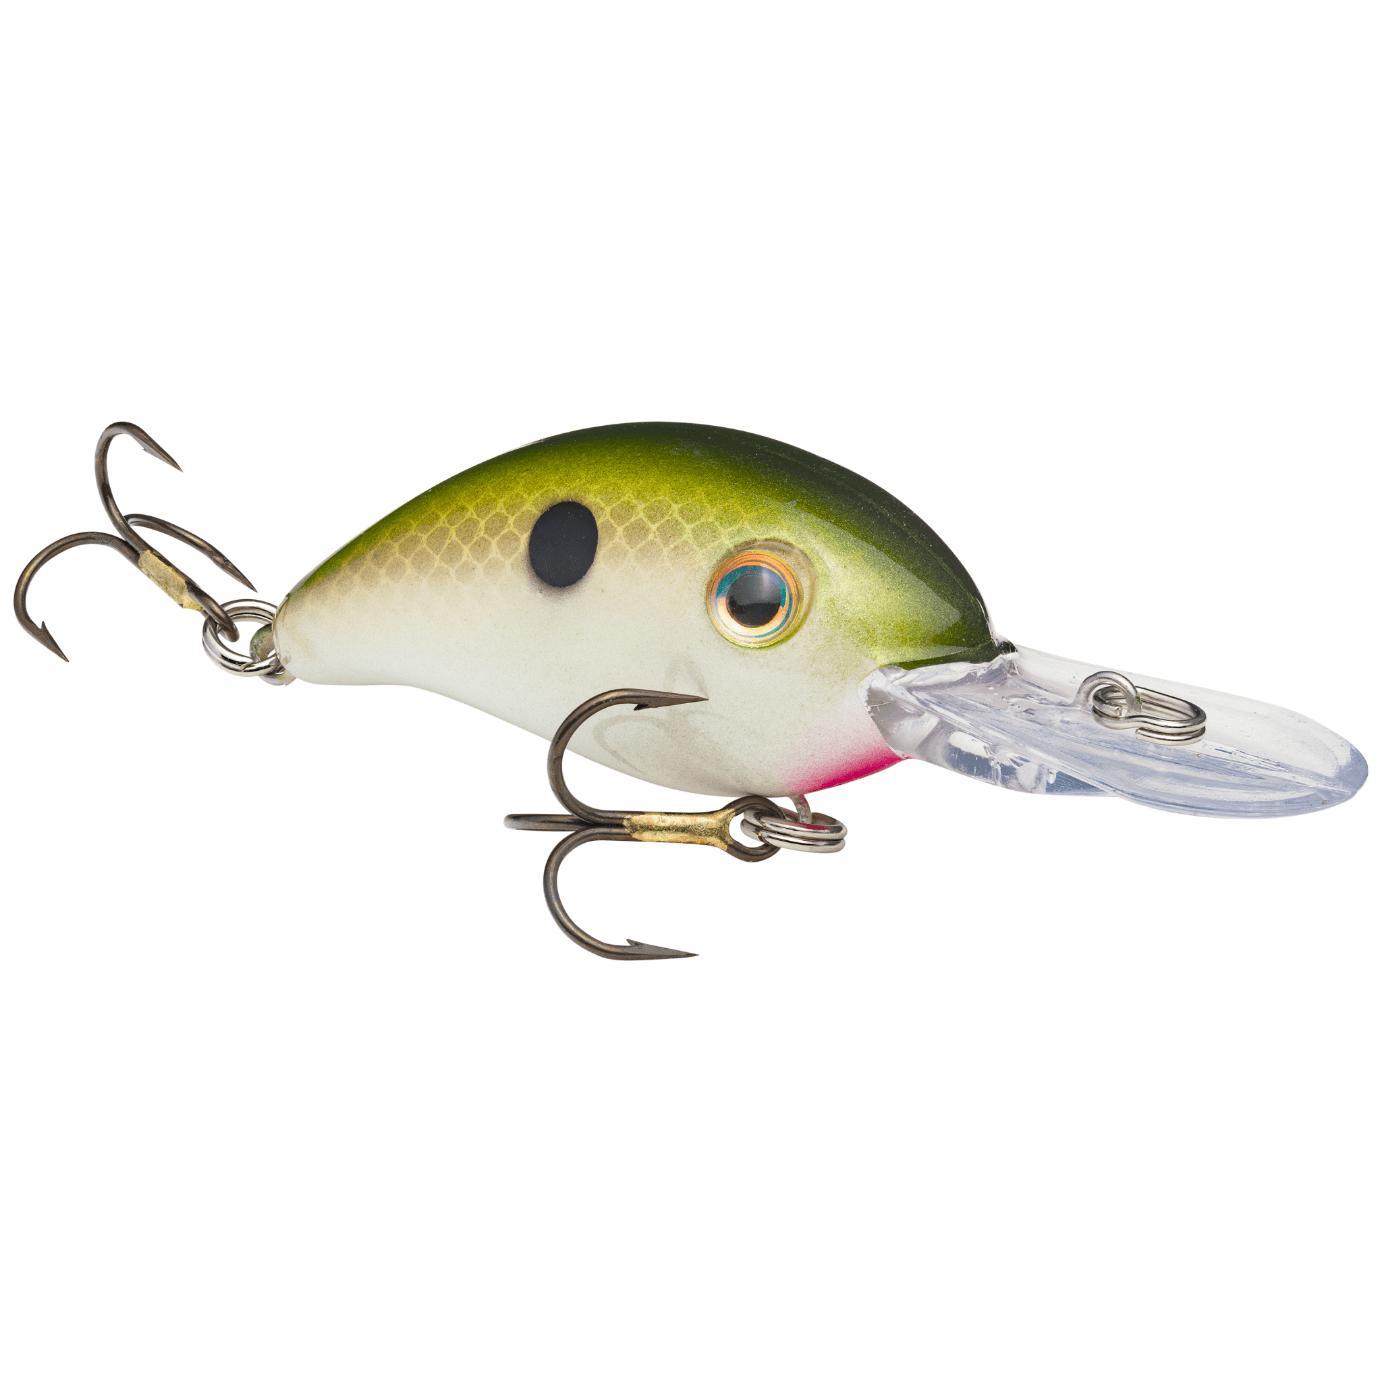 Strike King Pro-Model 3 Tennessee Shad